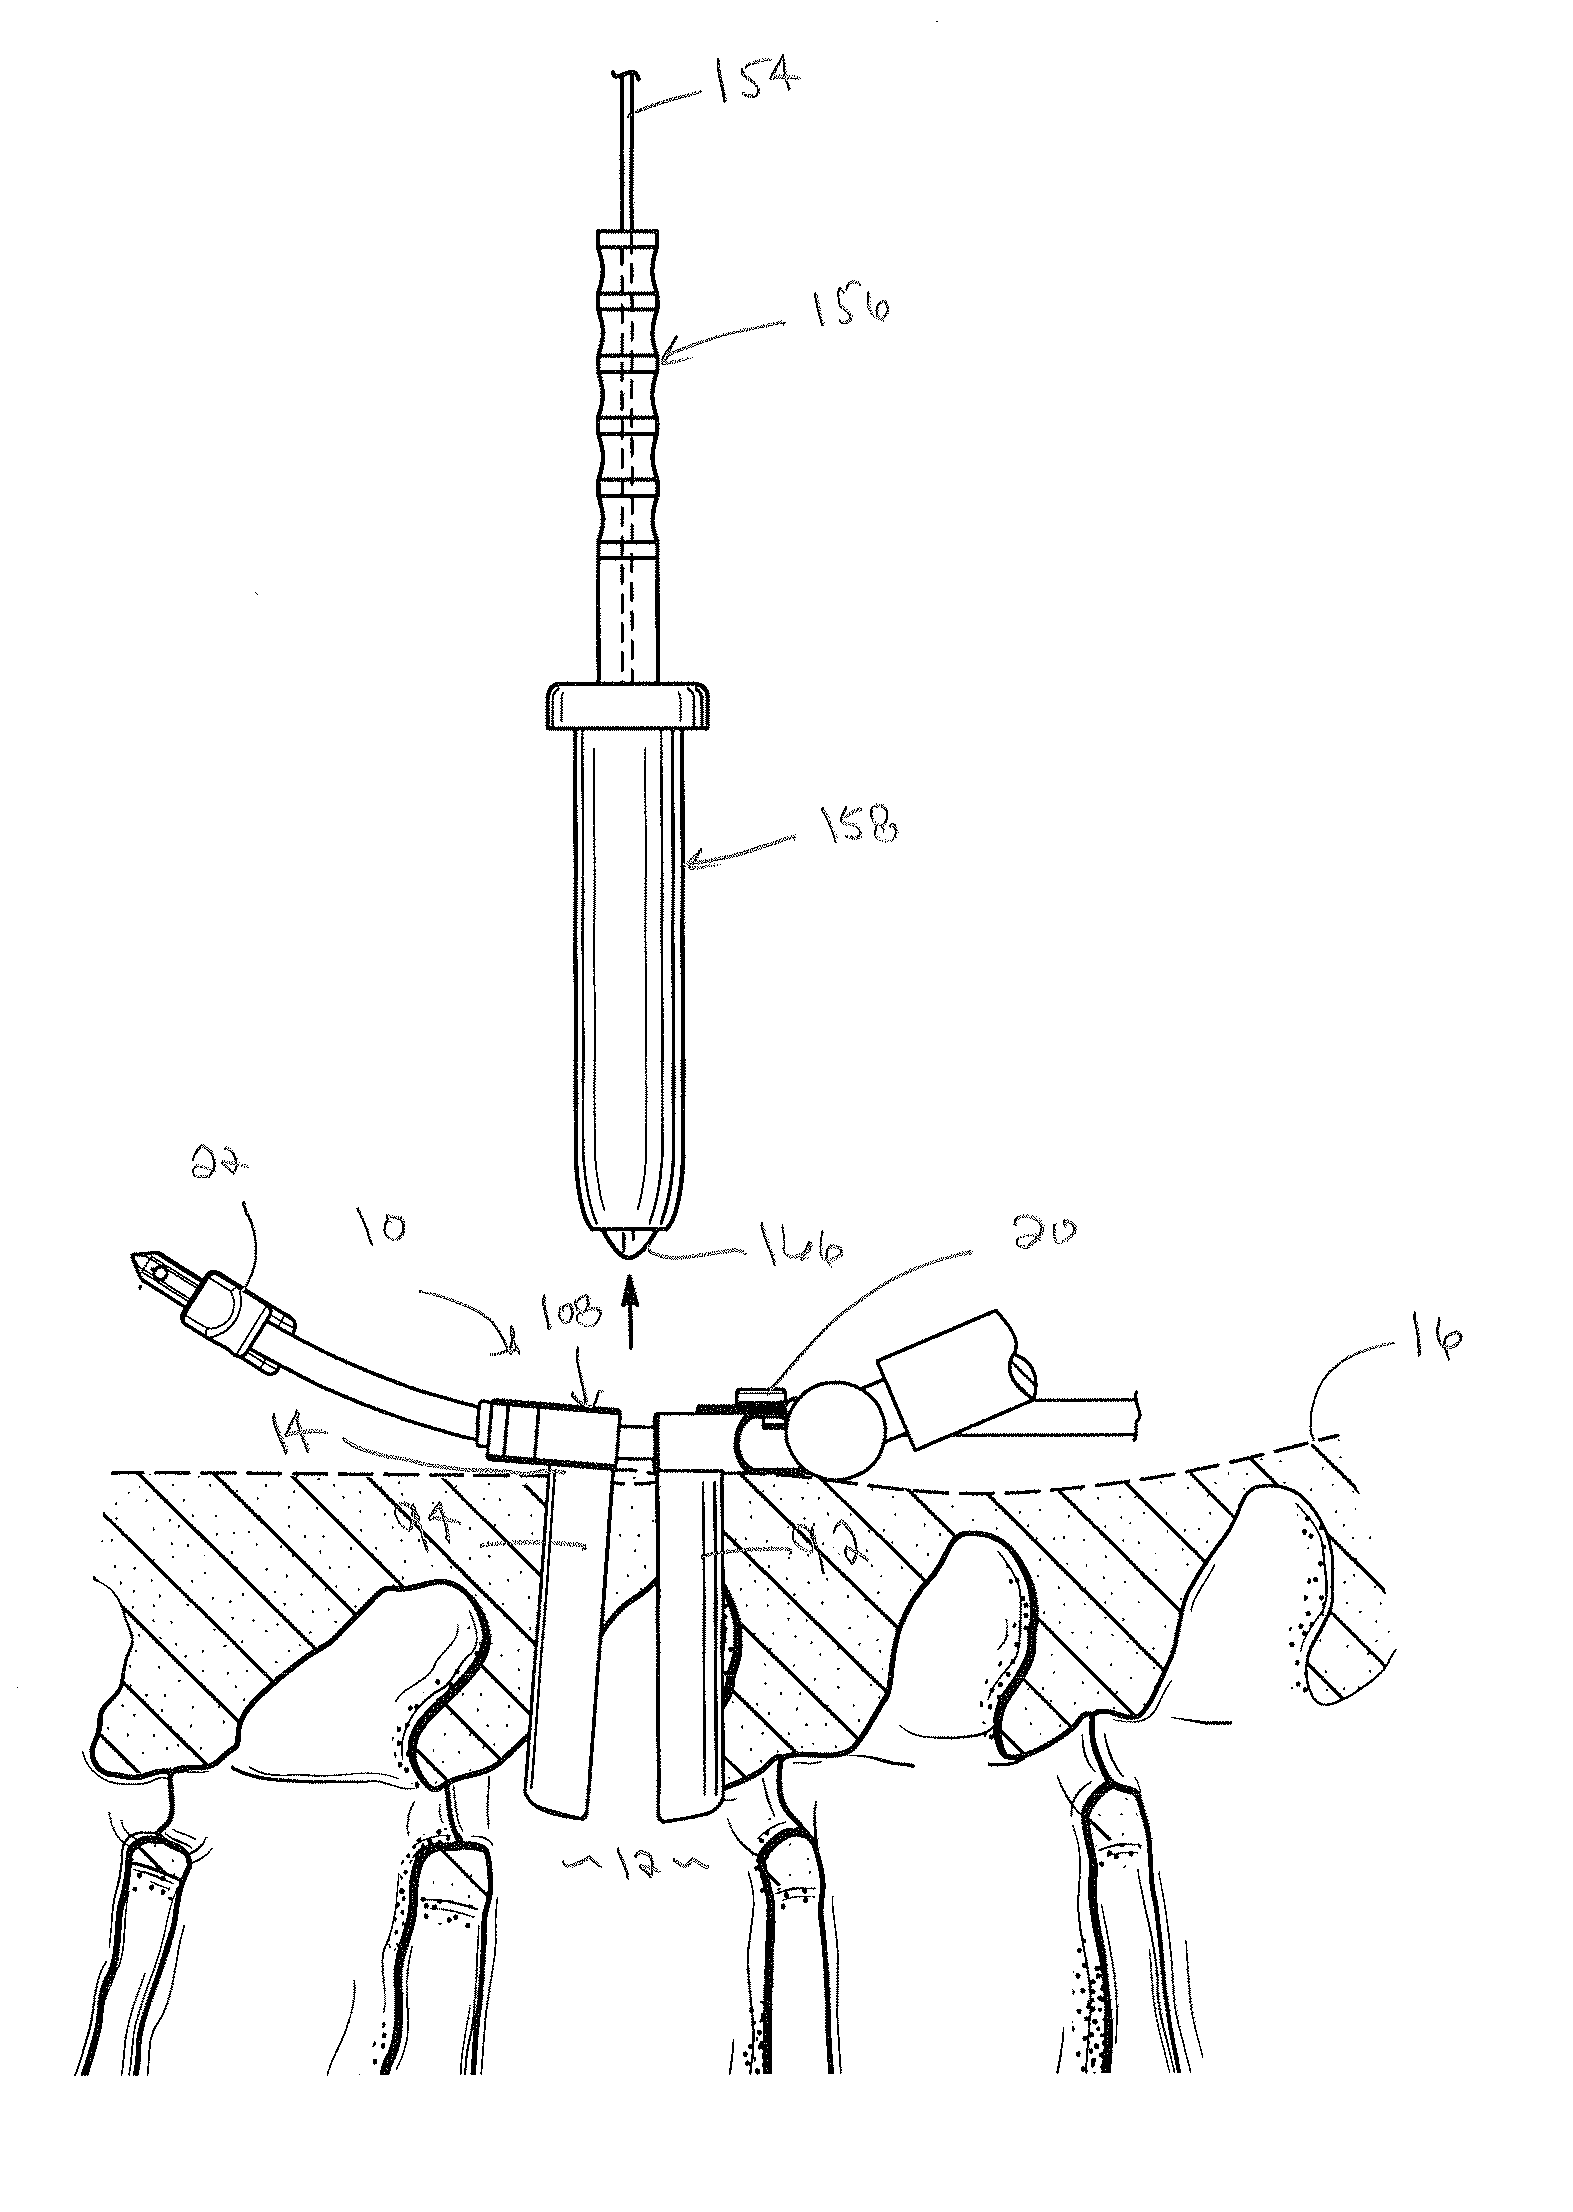 Surgical access system and method of using the same